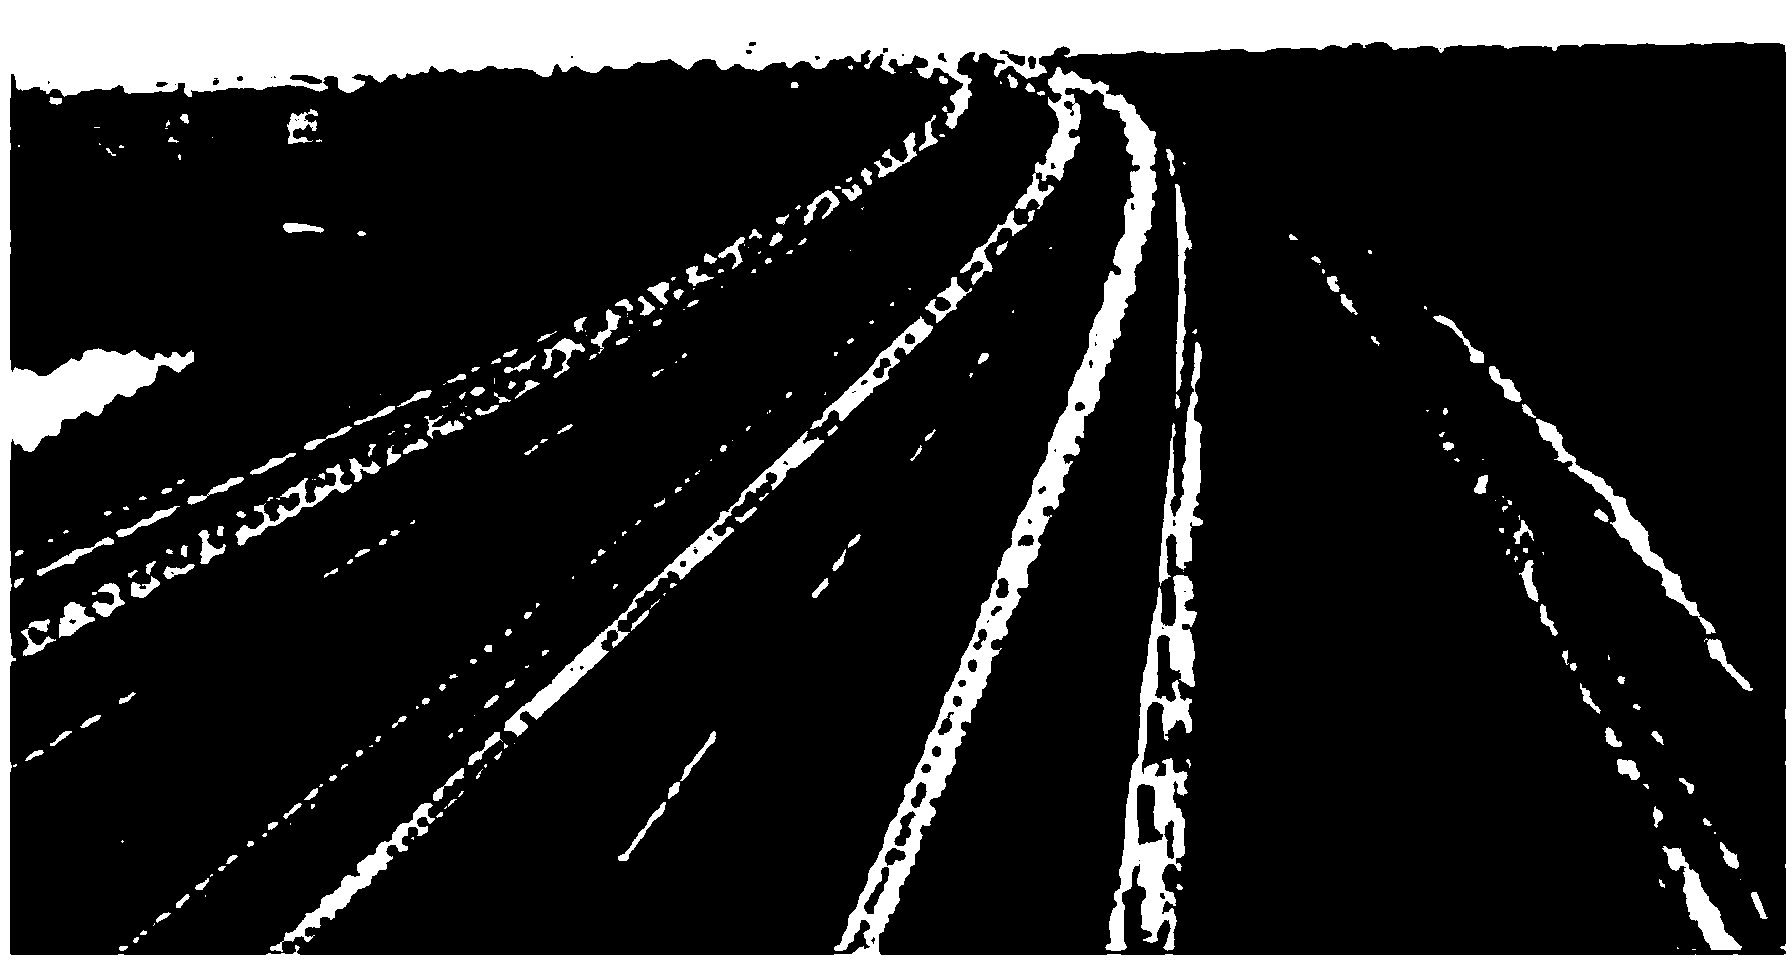 Traffic video visibility detecting method based on road surface brightness and least square approach